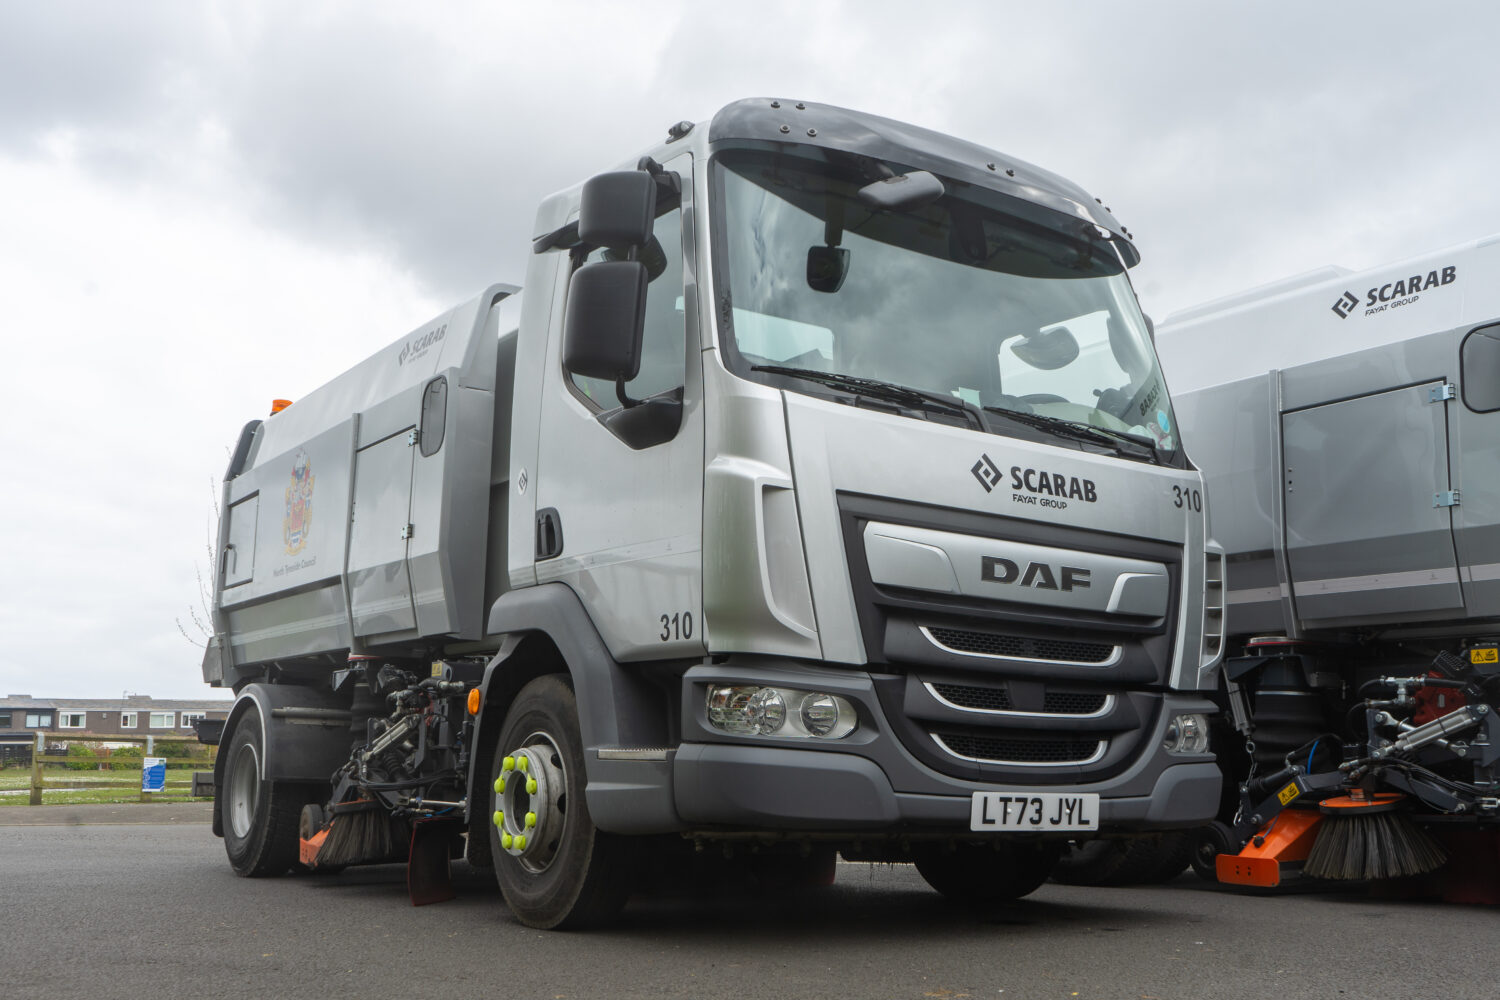 Silver Service - Scarab Delivers 6 New Sweepers to North Tyneside